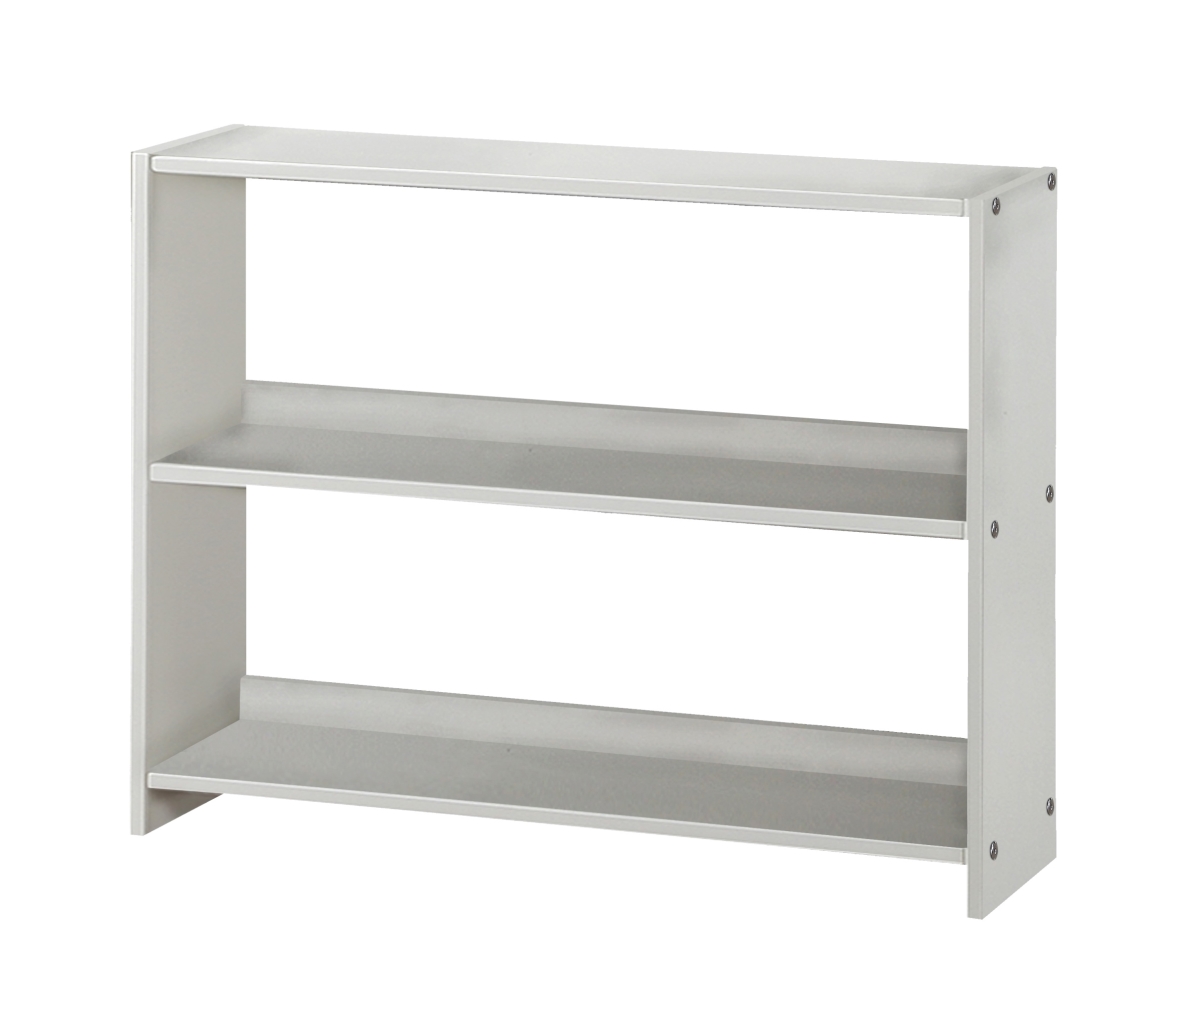 Picture of Donco Kids PD-795DW Louver Bookcase, White